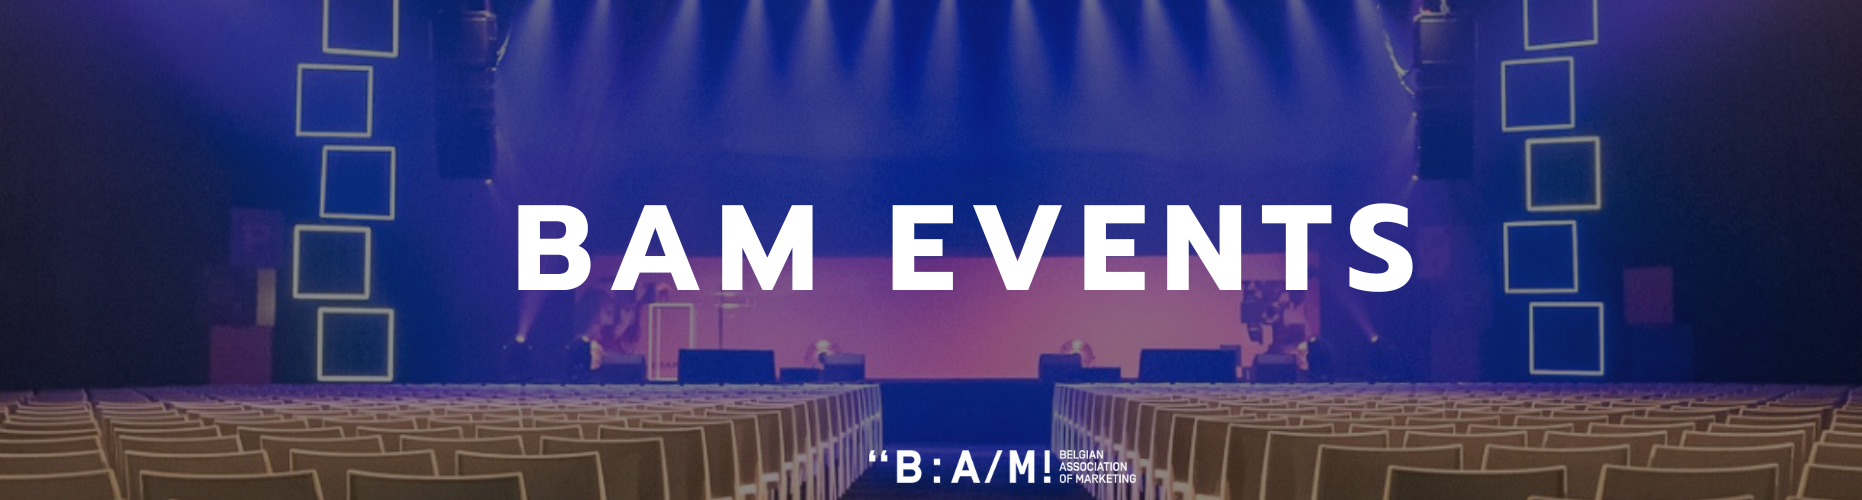 BAM Events